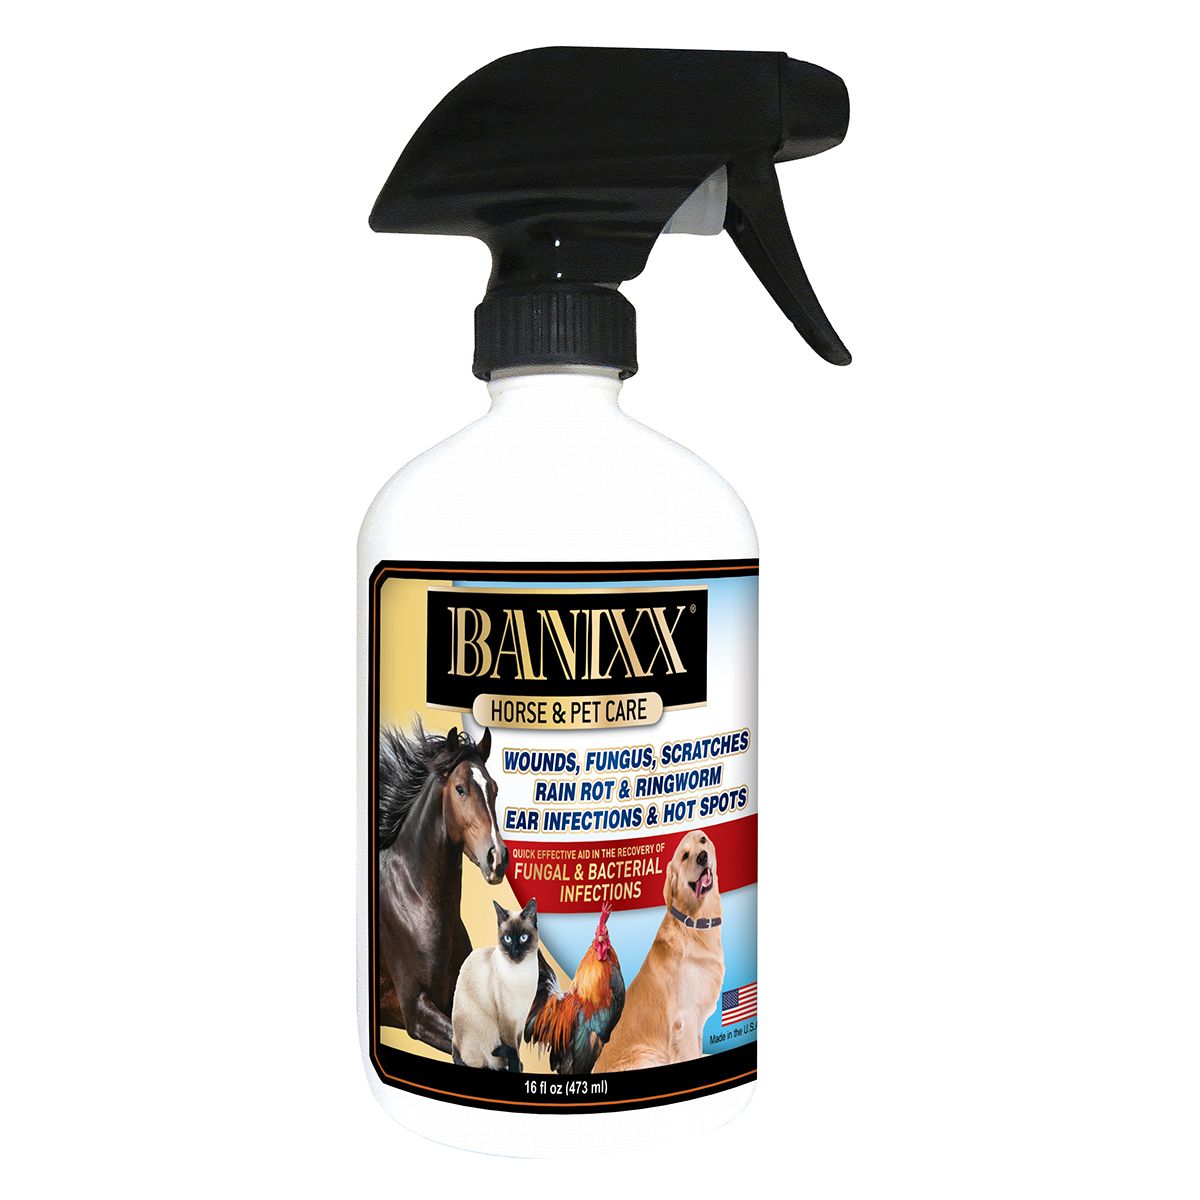 Banixx Horse & Pet Care for Fungal & Bacterial Infections 16 oz.